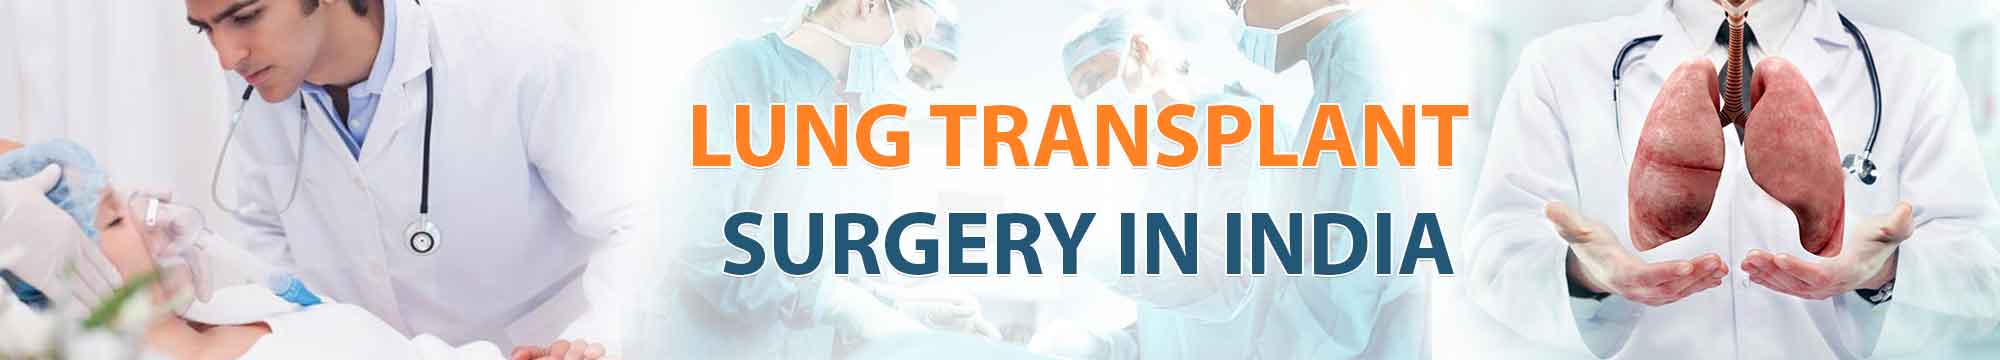 Lung Transplant Surgery in India